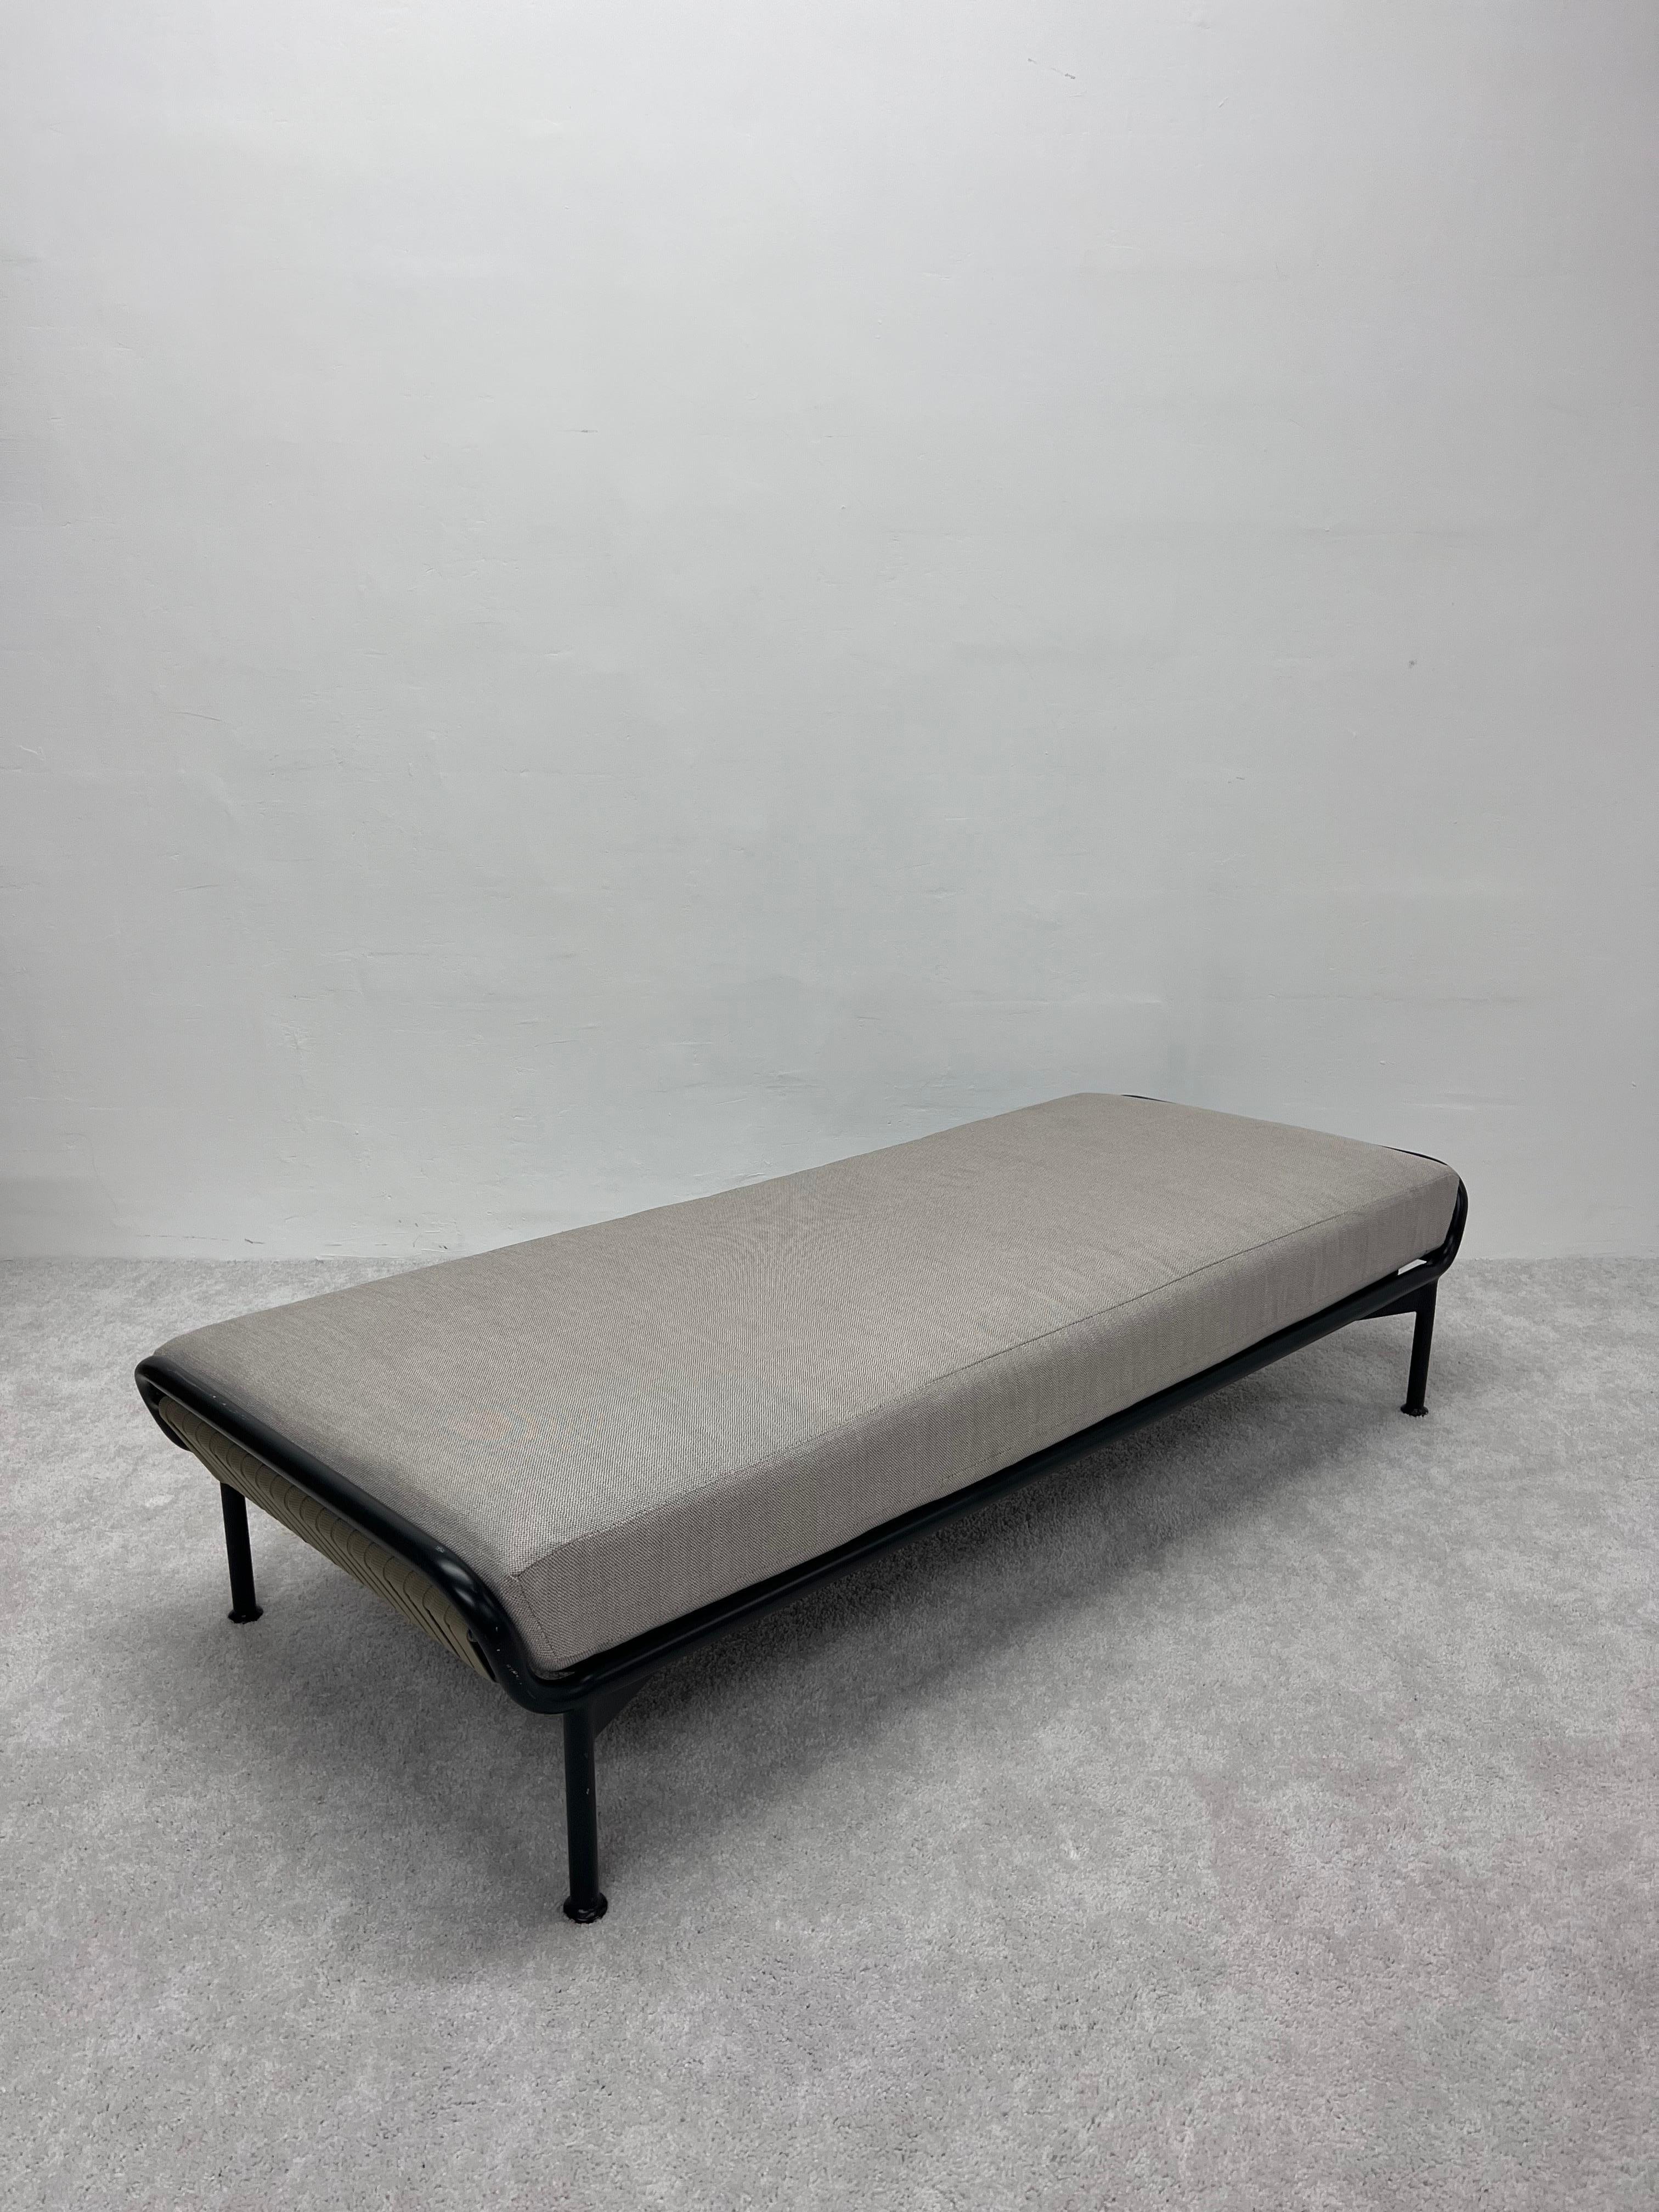 Modern John Caldwell Prevue Outdoor Daybed or Bench for Brown Jordan